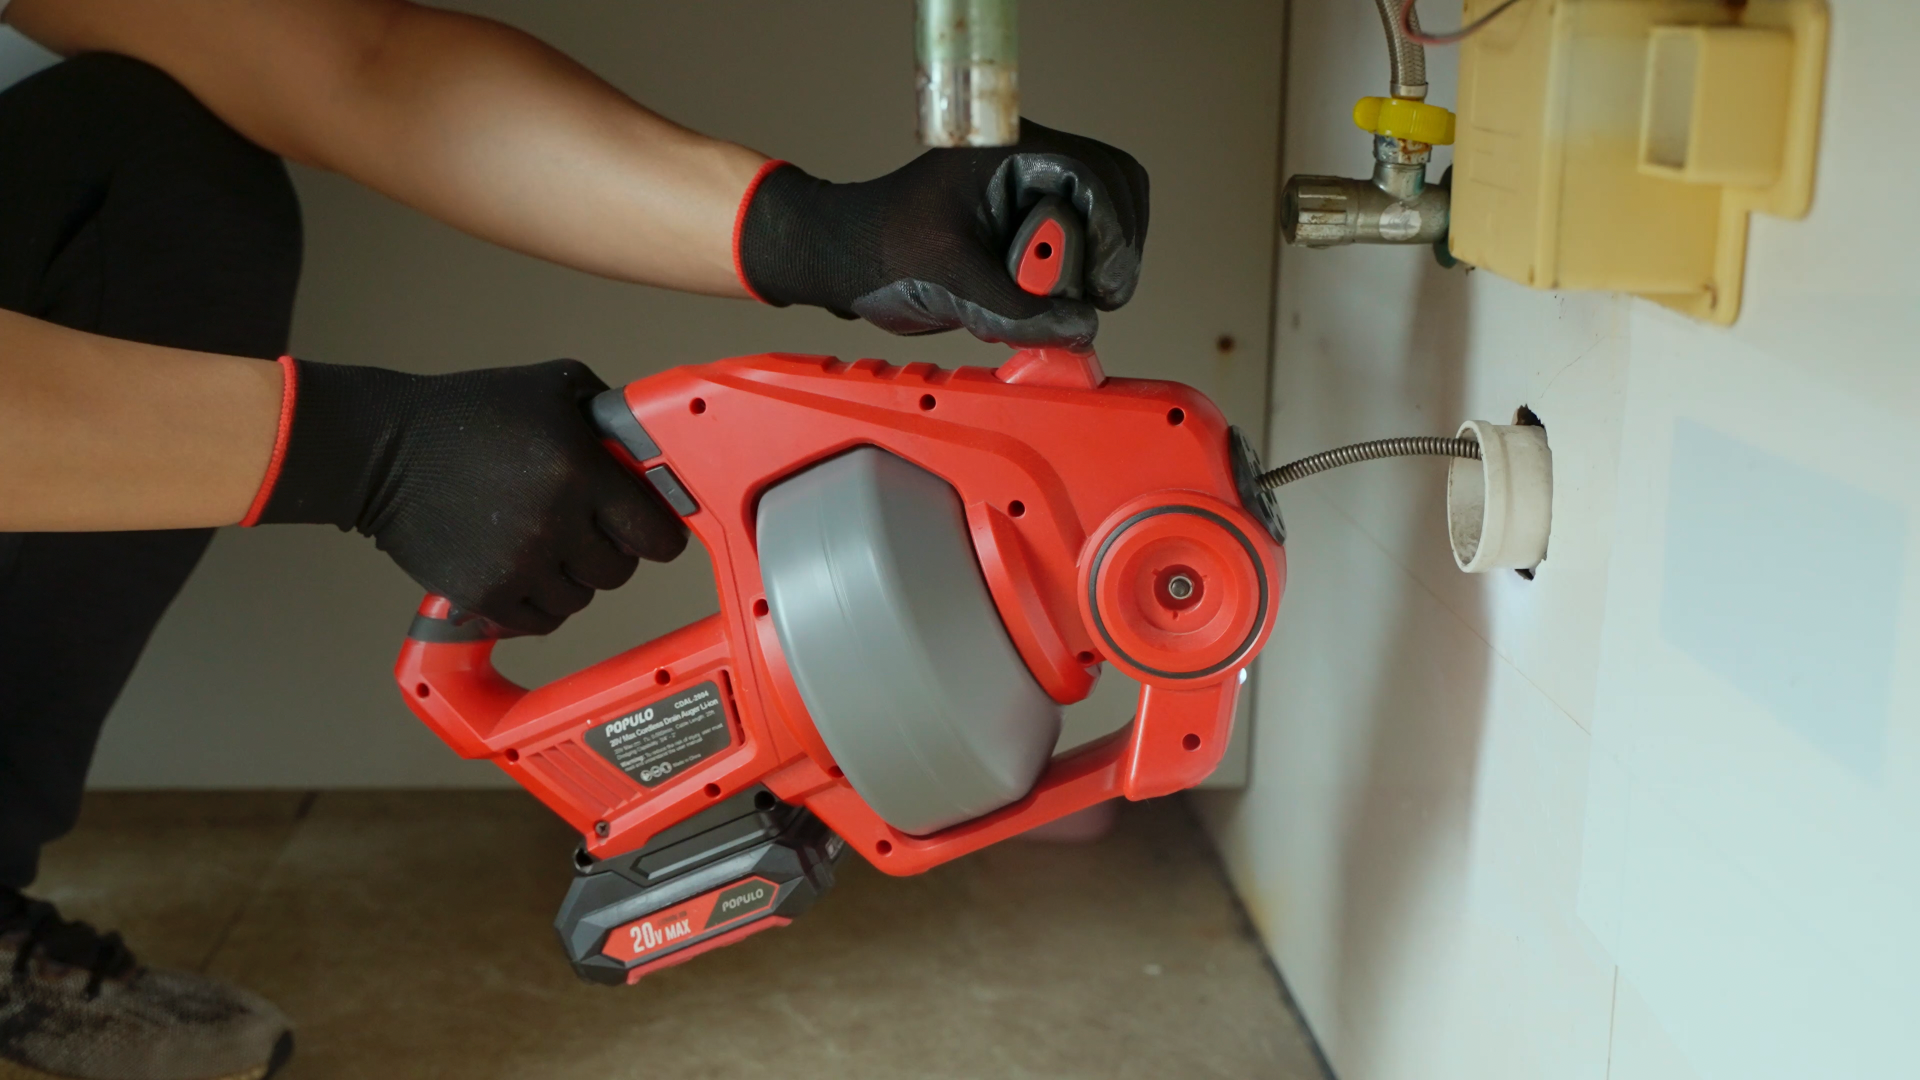 Using a Handheld Auger to Unclog a Sink